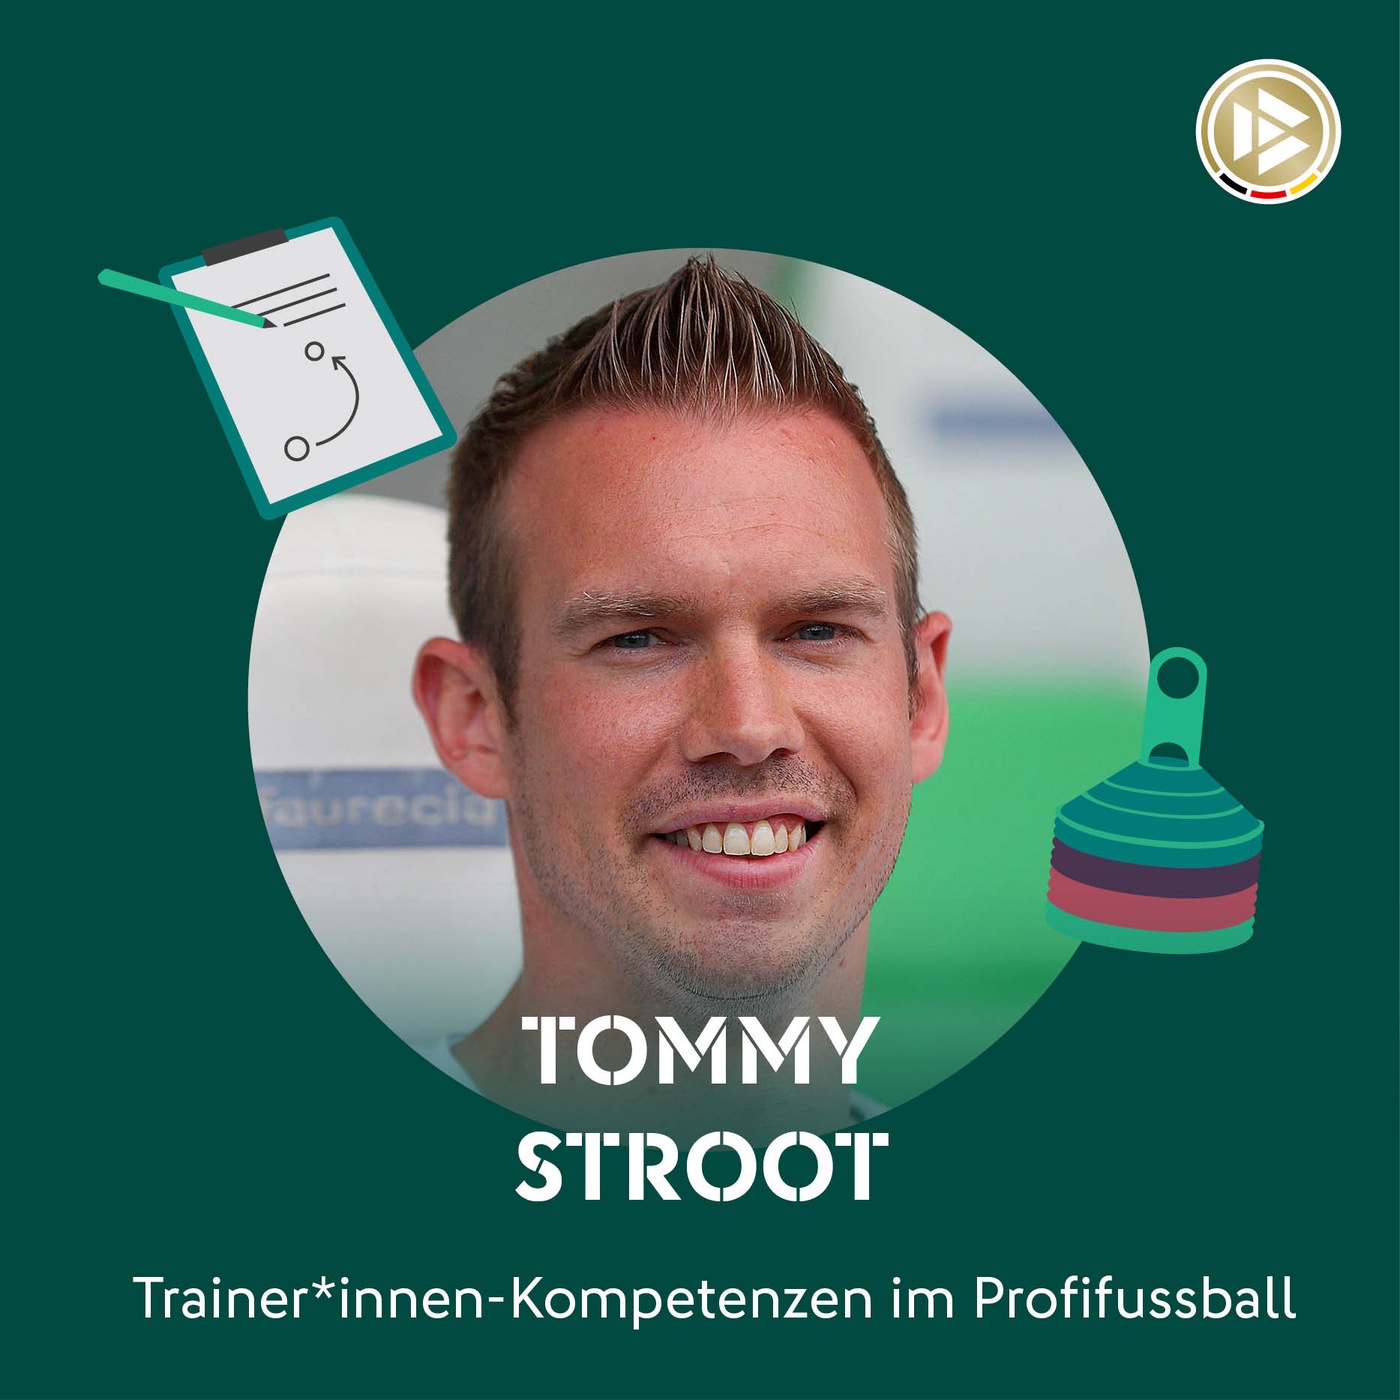 Tommy Stroot